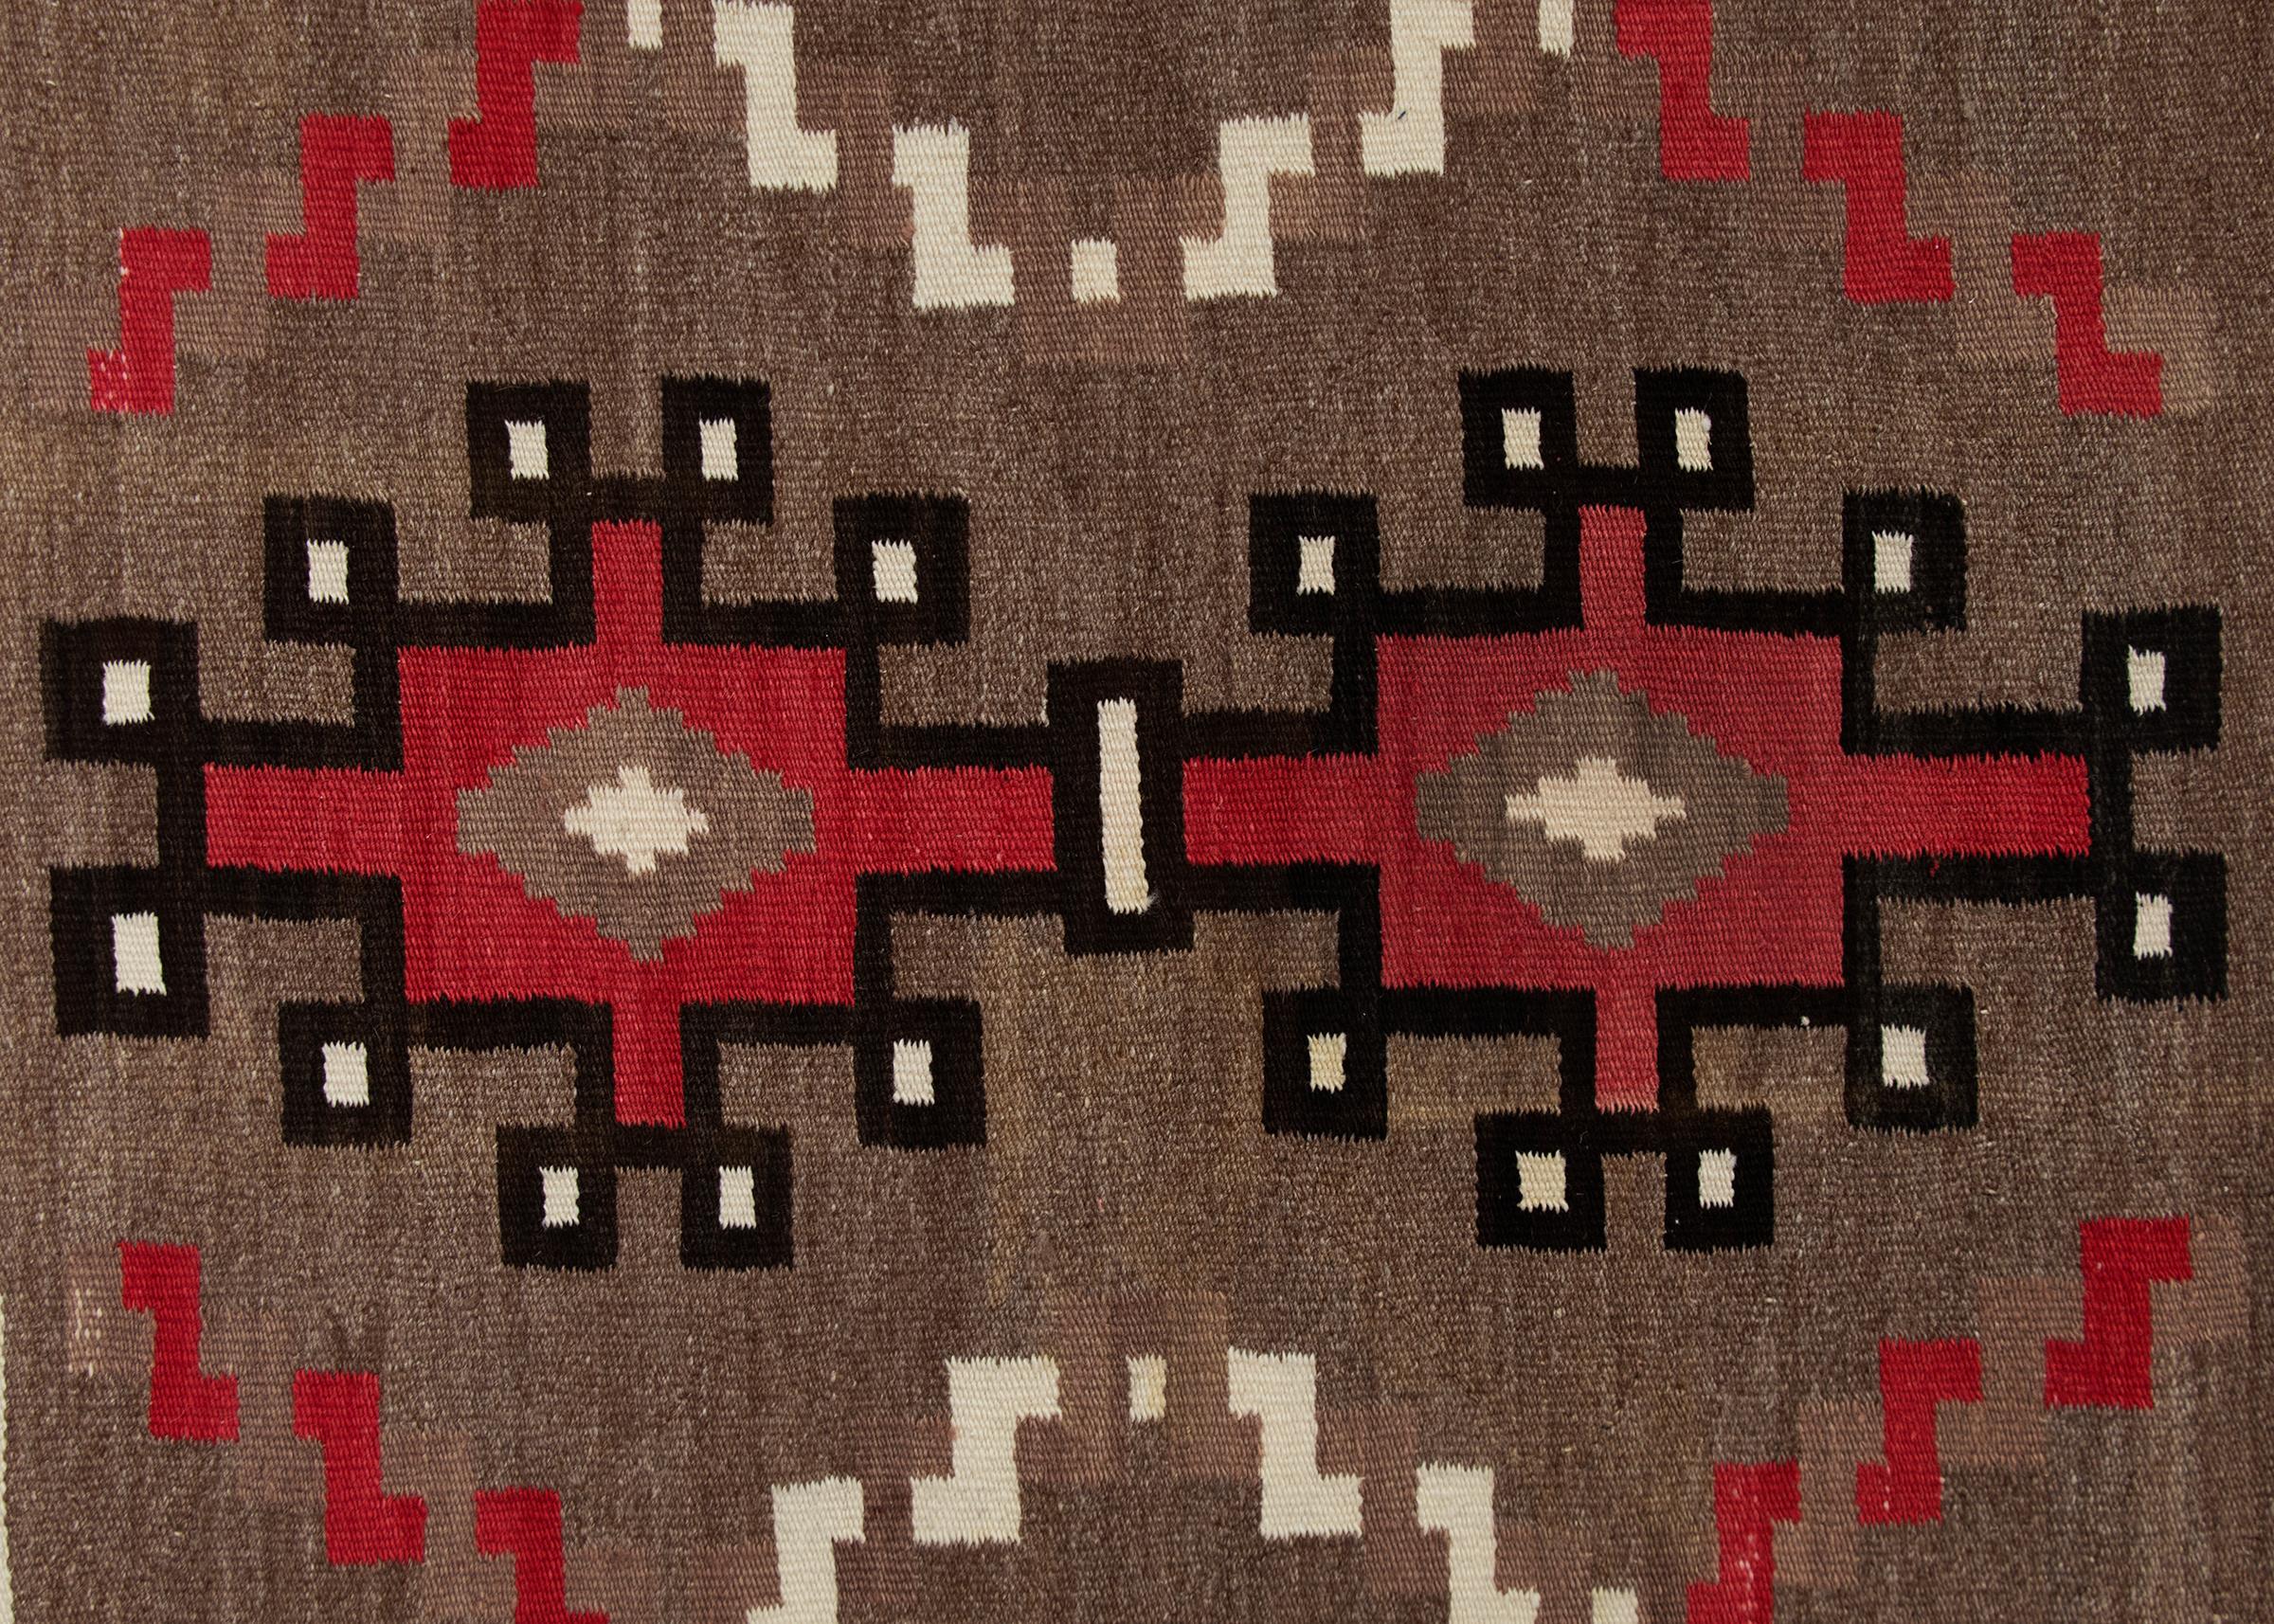 Vintage circa 1940s Navajo rug, handwoven from native hand-spun wool in natural fleece colors of brown/black, ivory and aniline dyed red. Hooked geometric elements are bordered by a tumbling block design. 
The Diné (Navajo) peoples are a Native